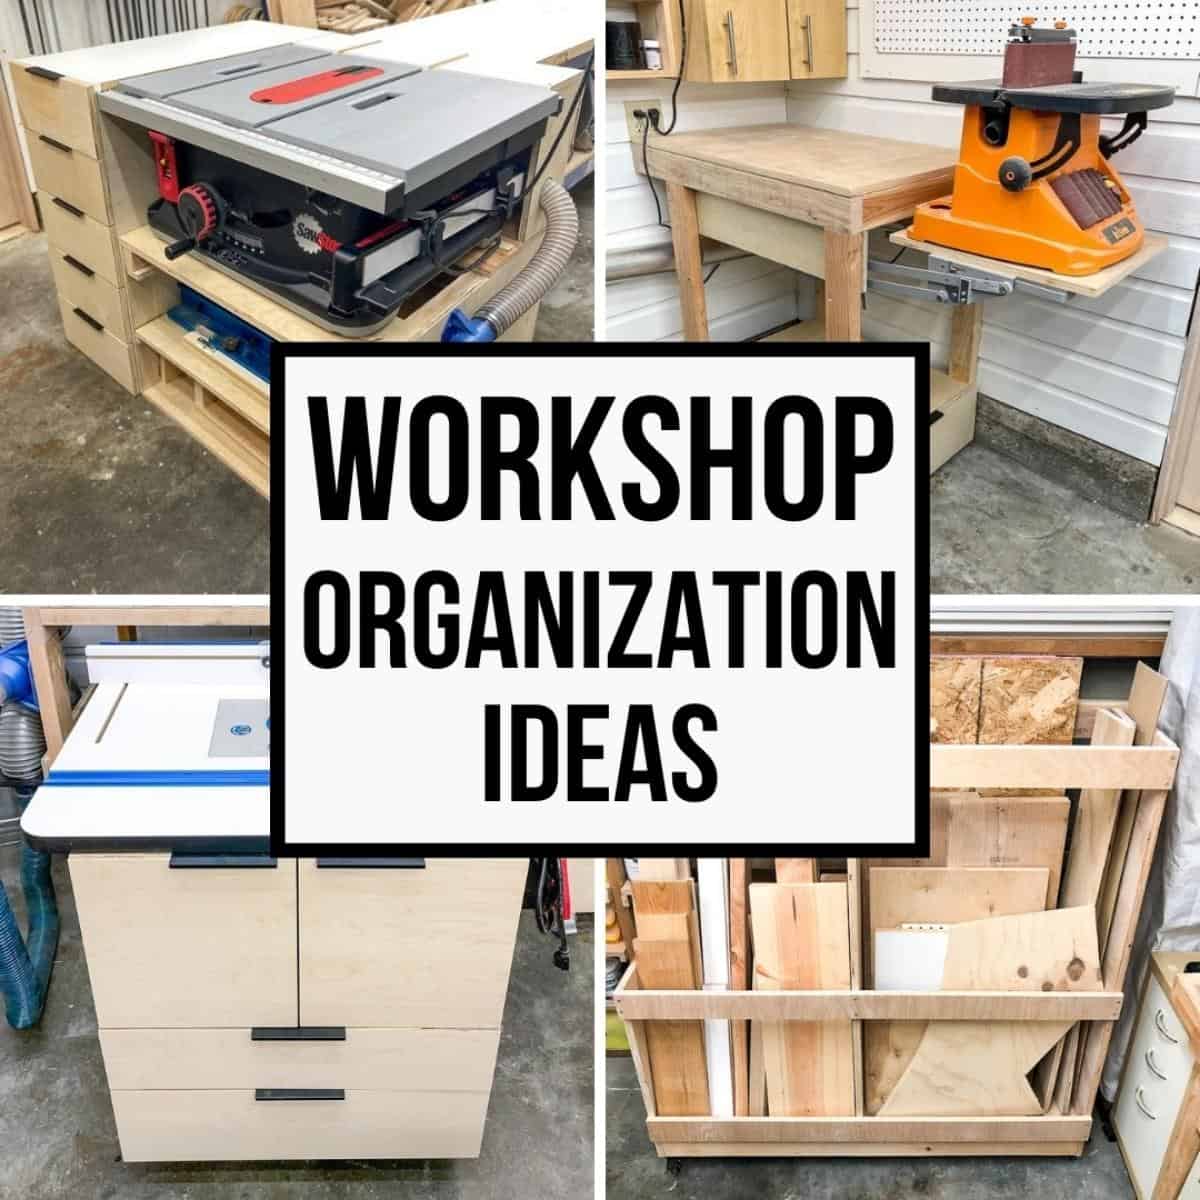 https://www.thehandymansdaughter.com/wp-content/uploads/2021/02/small-workshop-organization-ideas-featured-image.jpeg